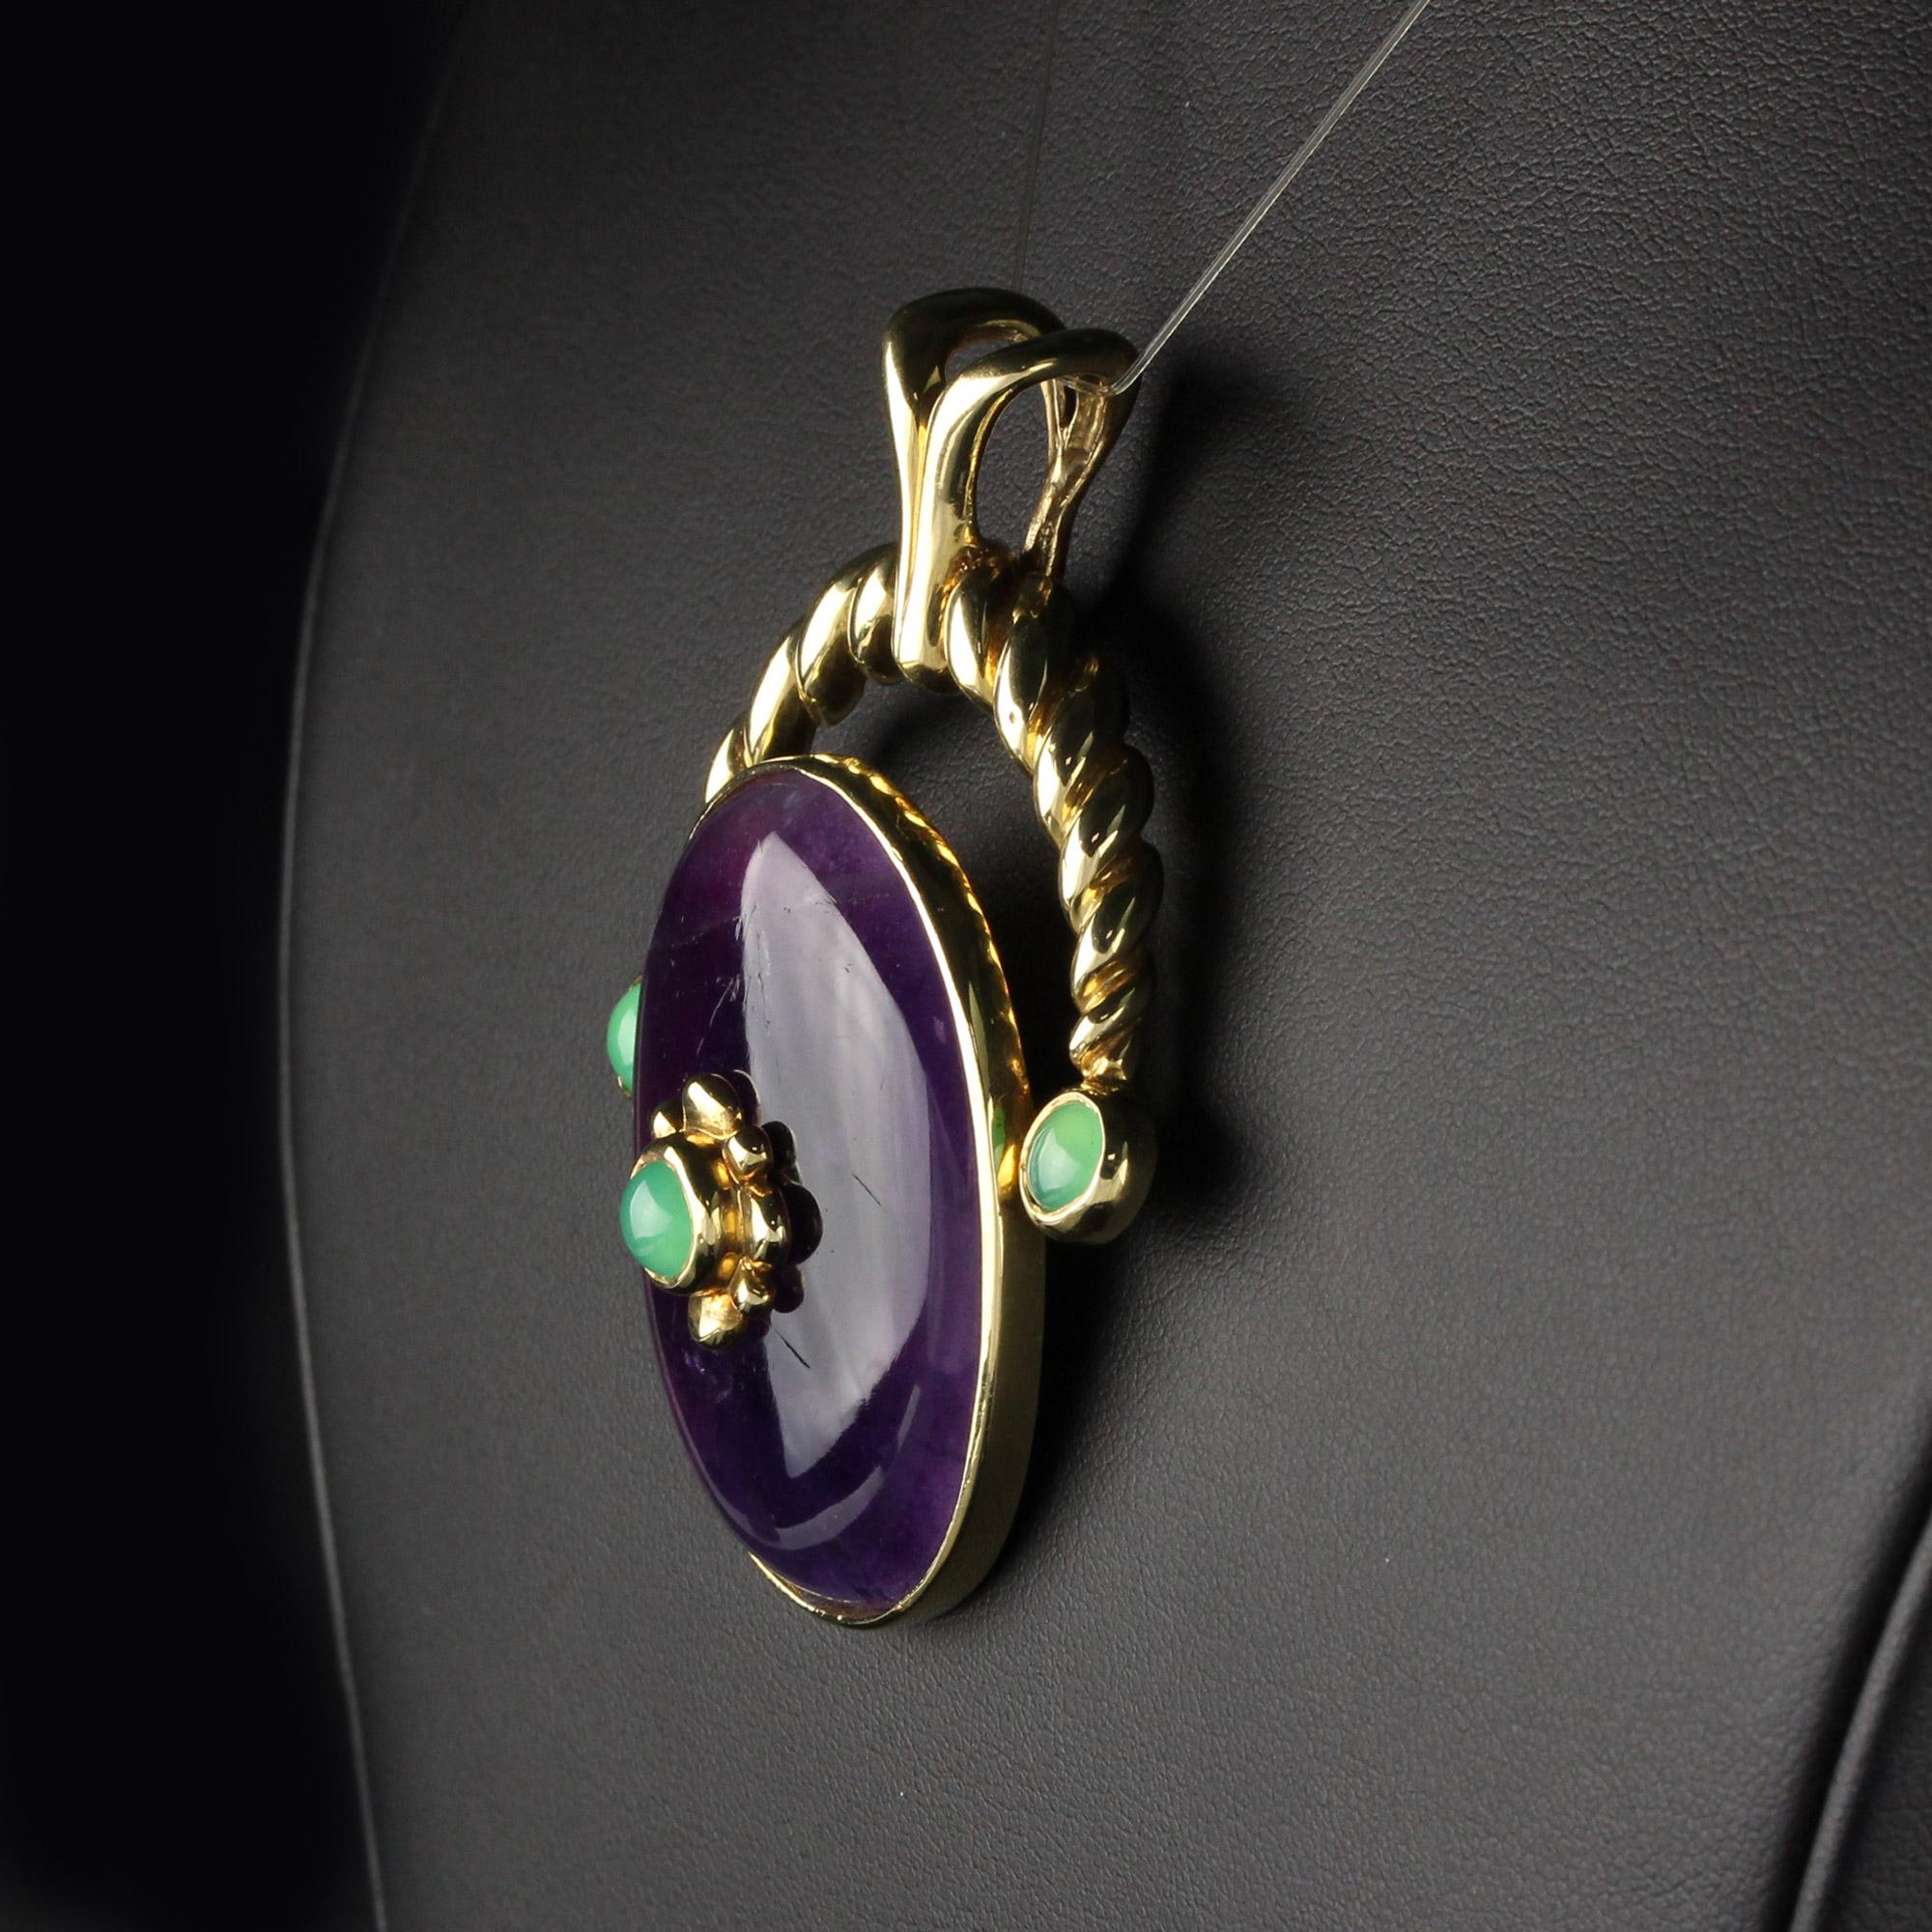 Vintage Estate 14 Karat/18 Karat Yellow Gold Amethyst and Chrysoprase Pendant In Good Condition For Sale In Great Neck, NY